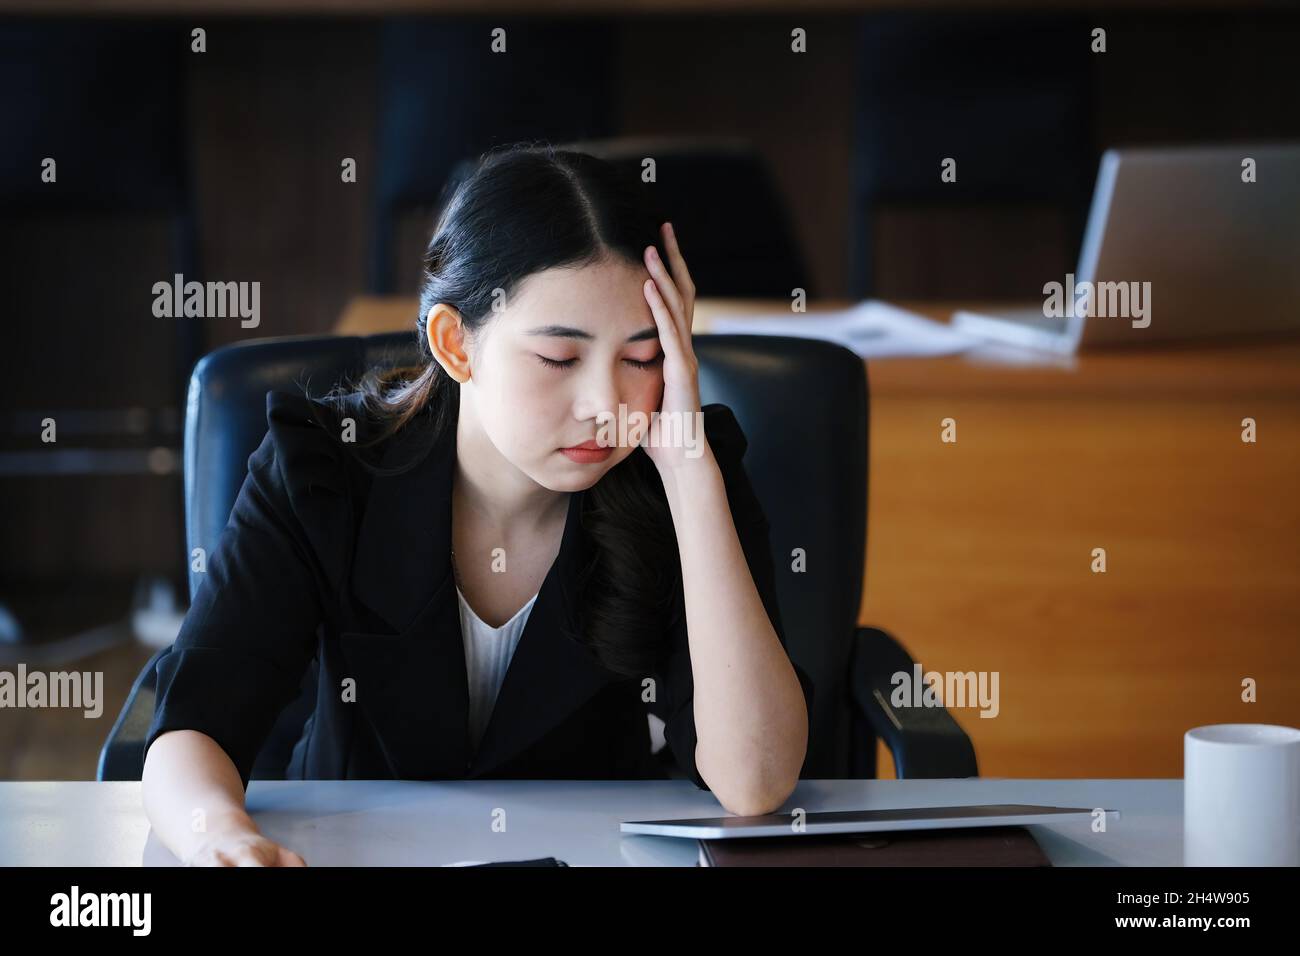 Company employees show boredom from unfinished. Stock Photo